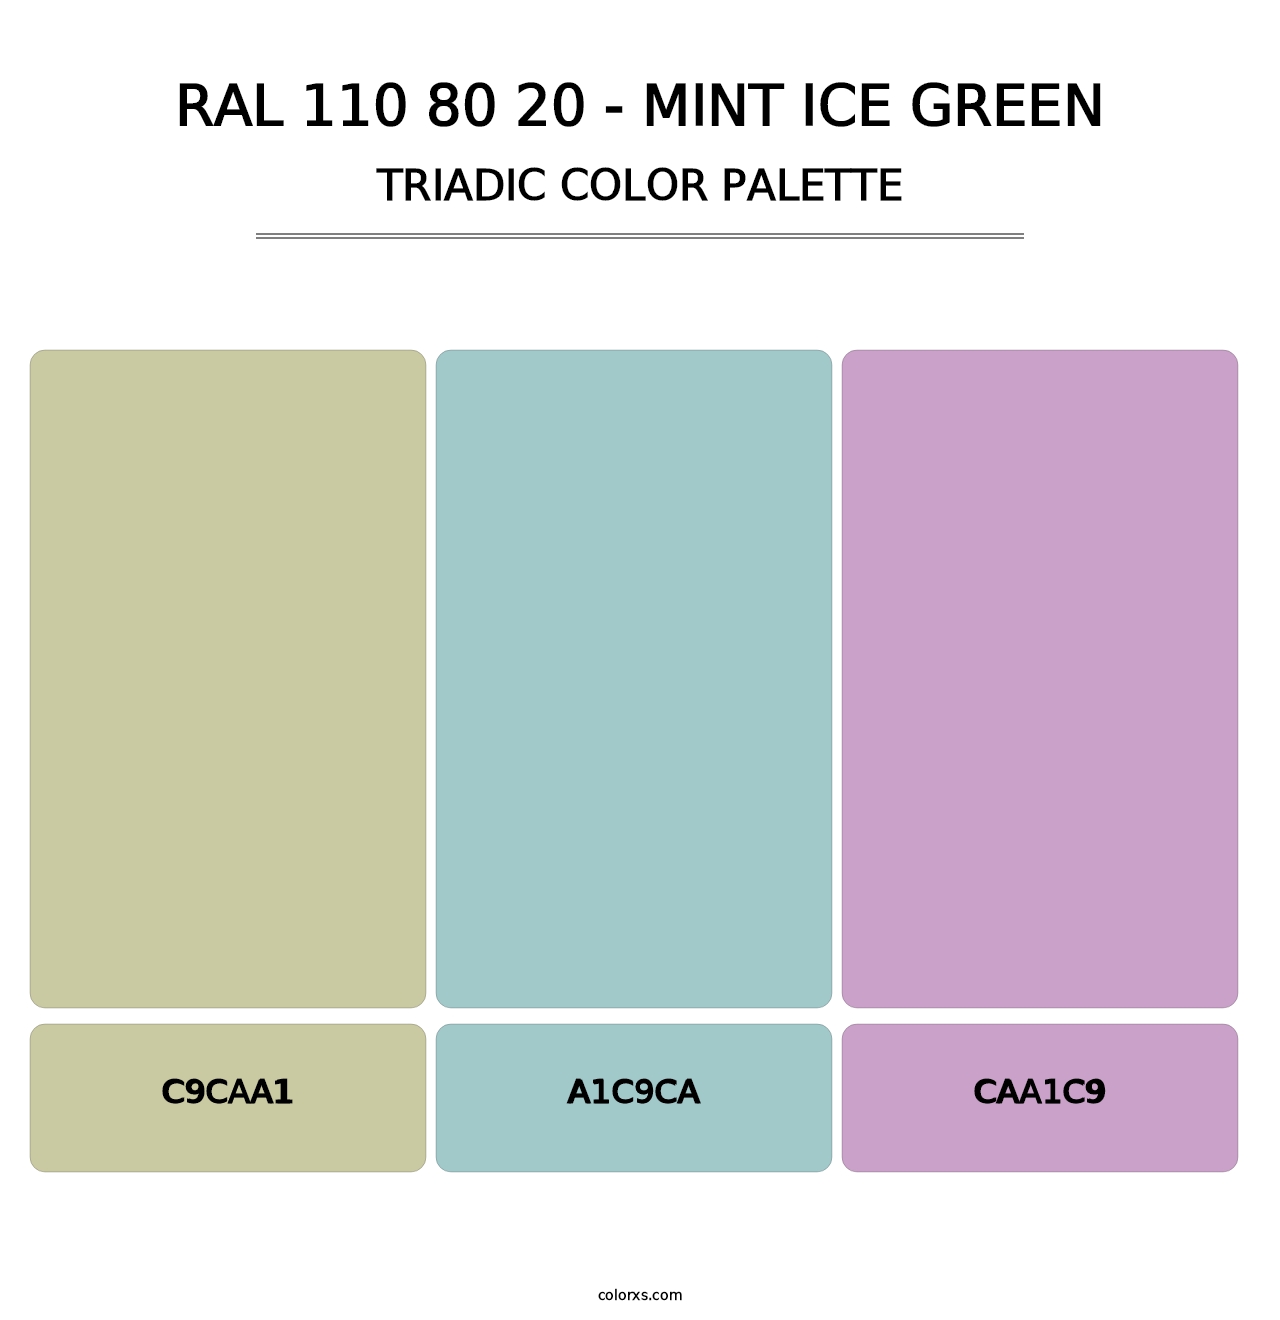 RAL 110 80 20 - Mint Ice Green - Triadic Color Palette